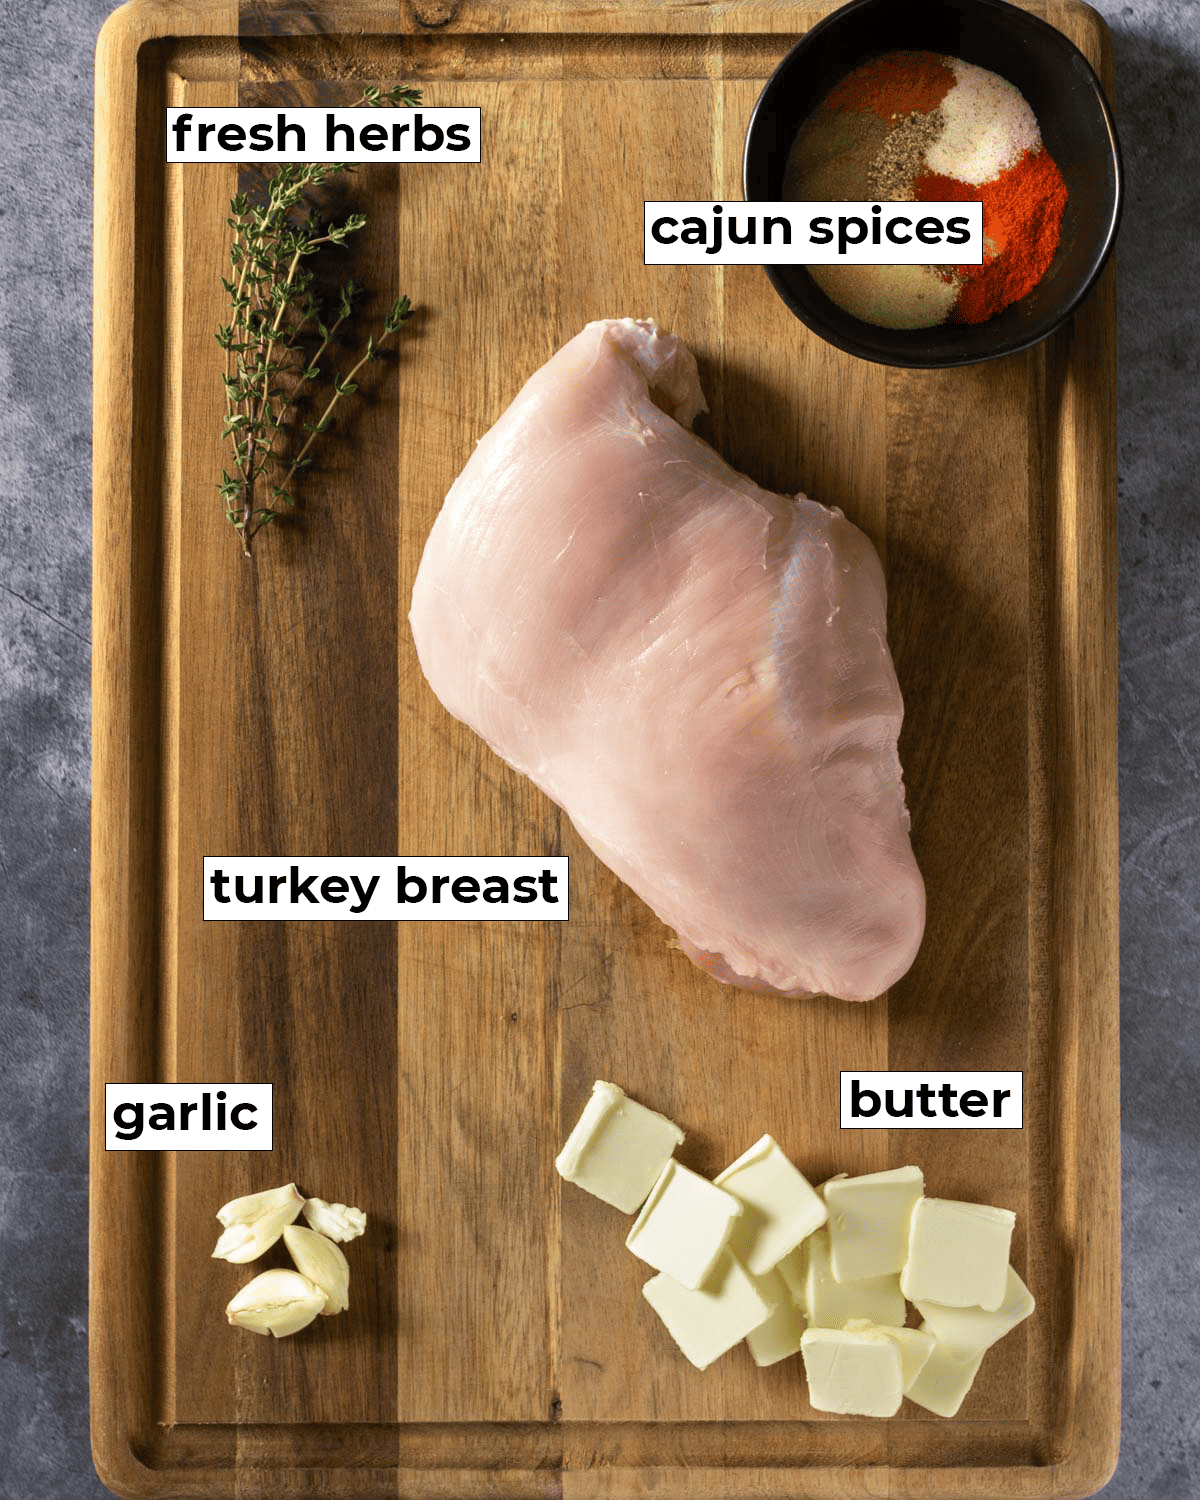 Ingredients for Sous vide cajun turkey breast on a cutting board.